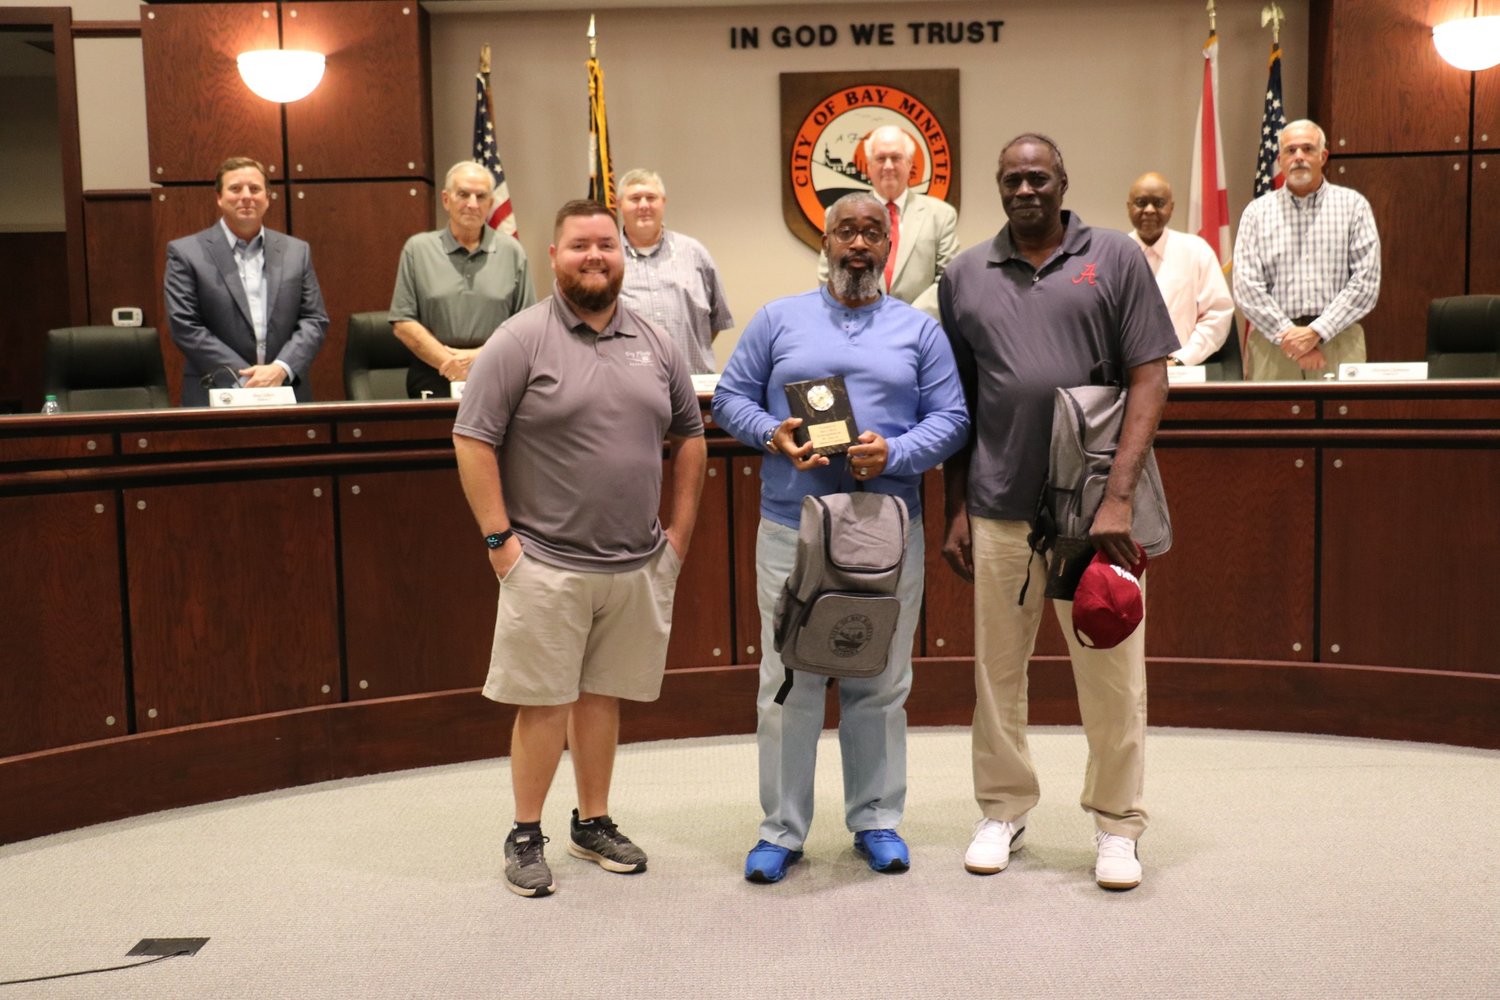 City of Bay Minette Recreation Director Blake Clark honored two longtime youth coaches during the Dec. 5 meeting of the Bay Minette City Council. Johnny Palmer and Barry Hurst each spent more than 30 years on the sidelines of youth sports in the city.